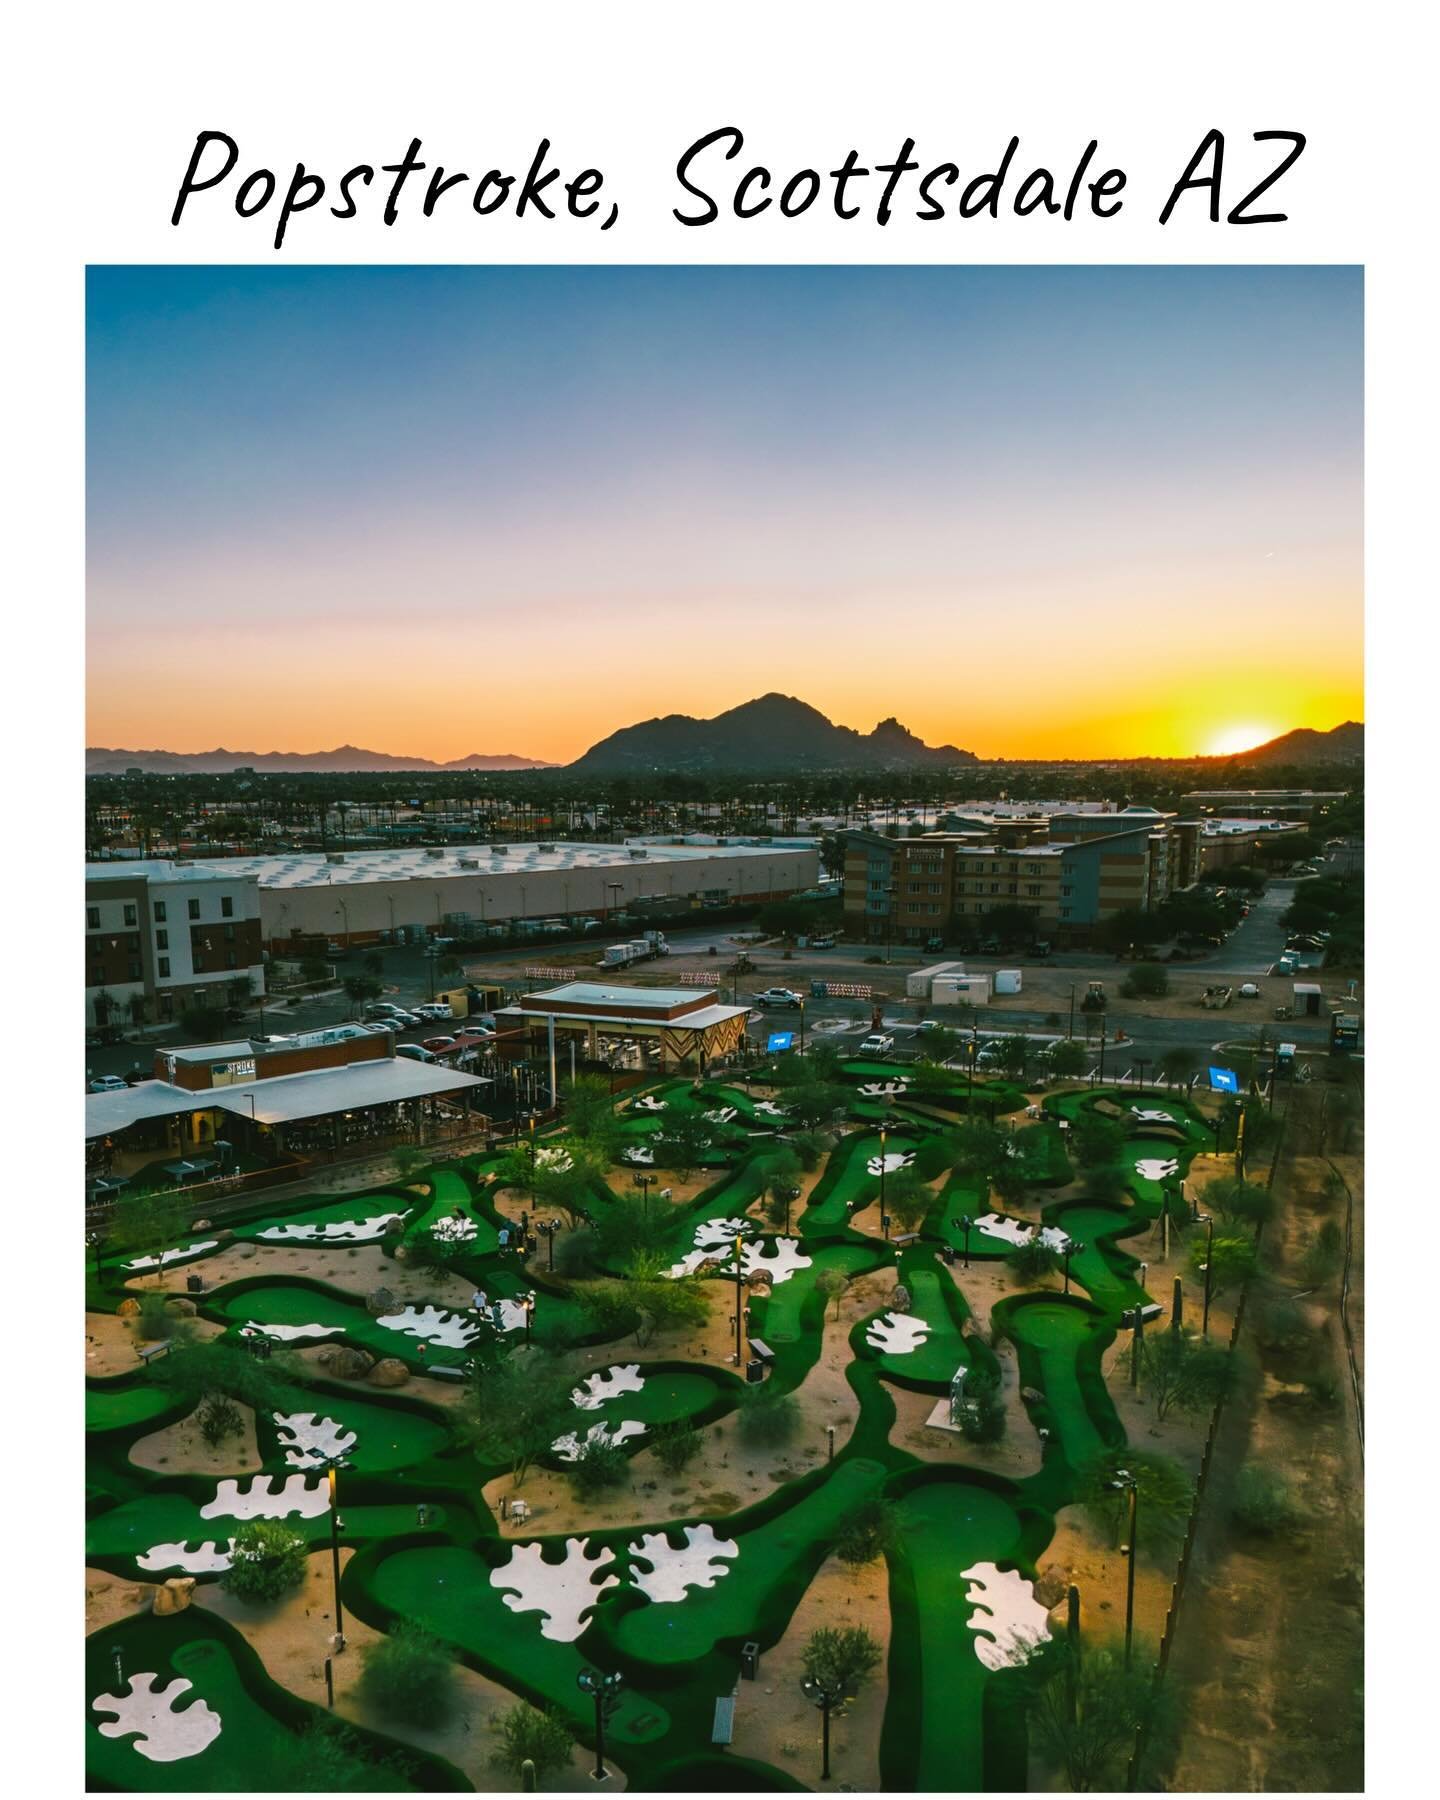 Scottsdale vibes from above: Drone shots from PopStroke&rsquo;s opening week in the desert🌵📸 

#scottsdale #popstroke #drone #photography #videography